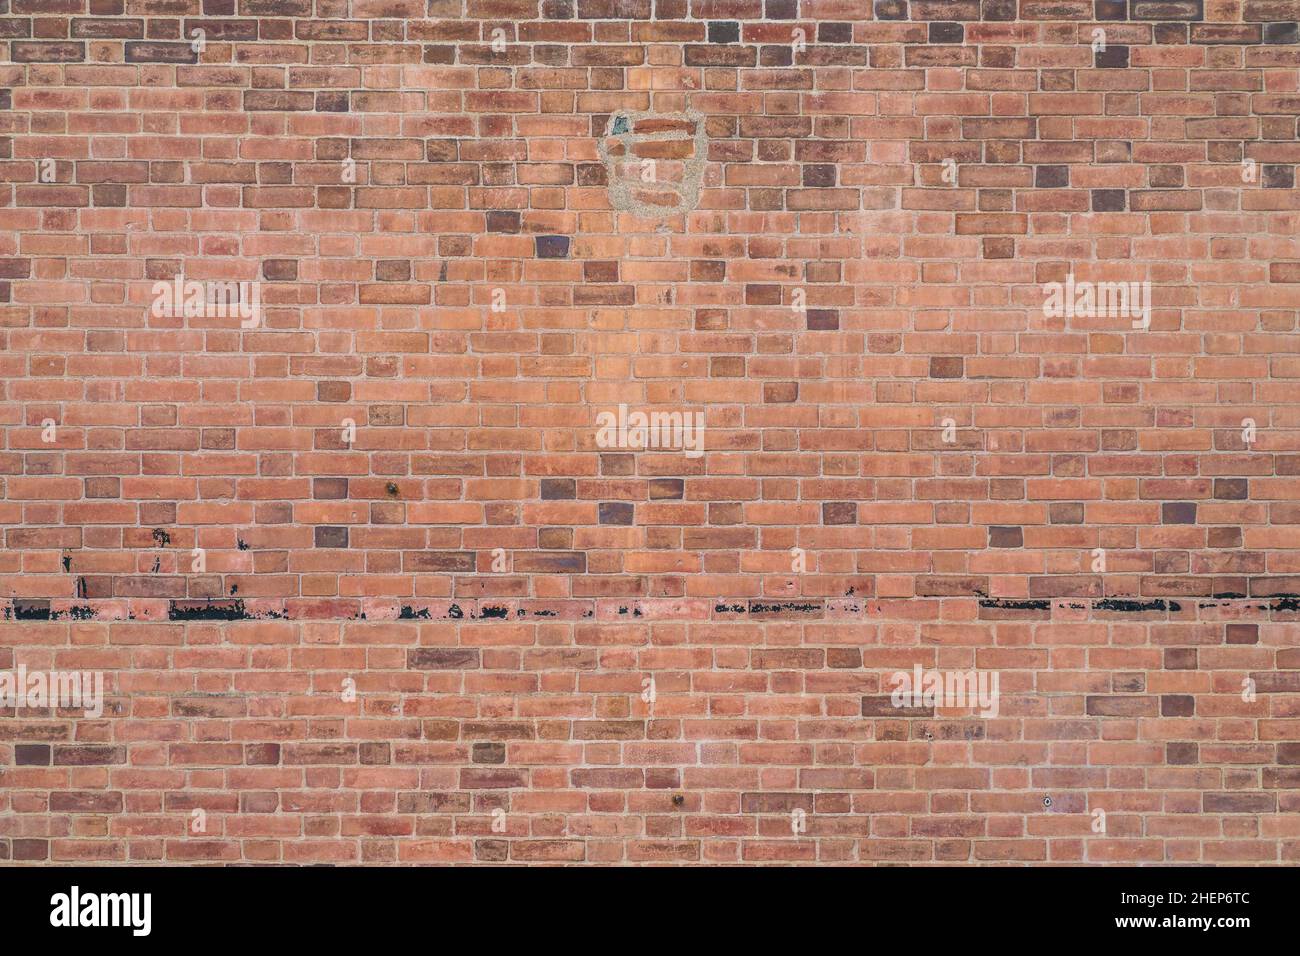 red brick wall texture for background,Ready for product display montage. Stock Photo